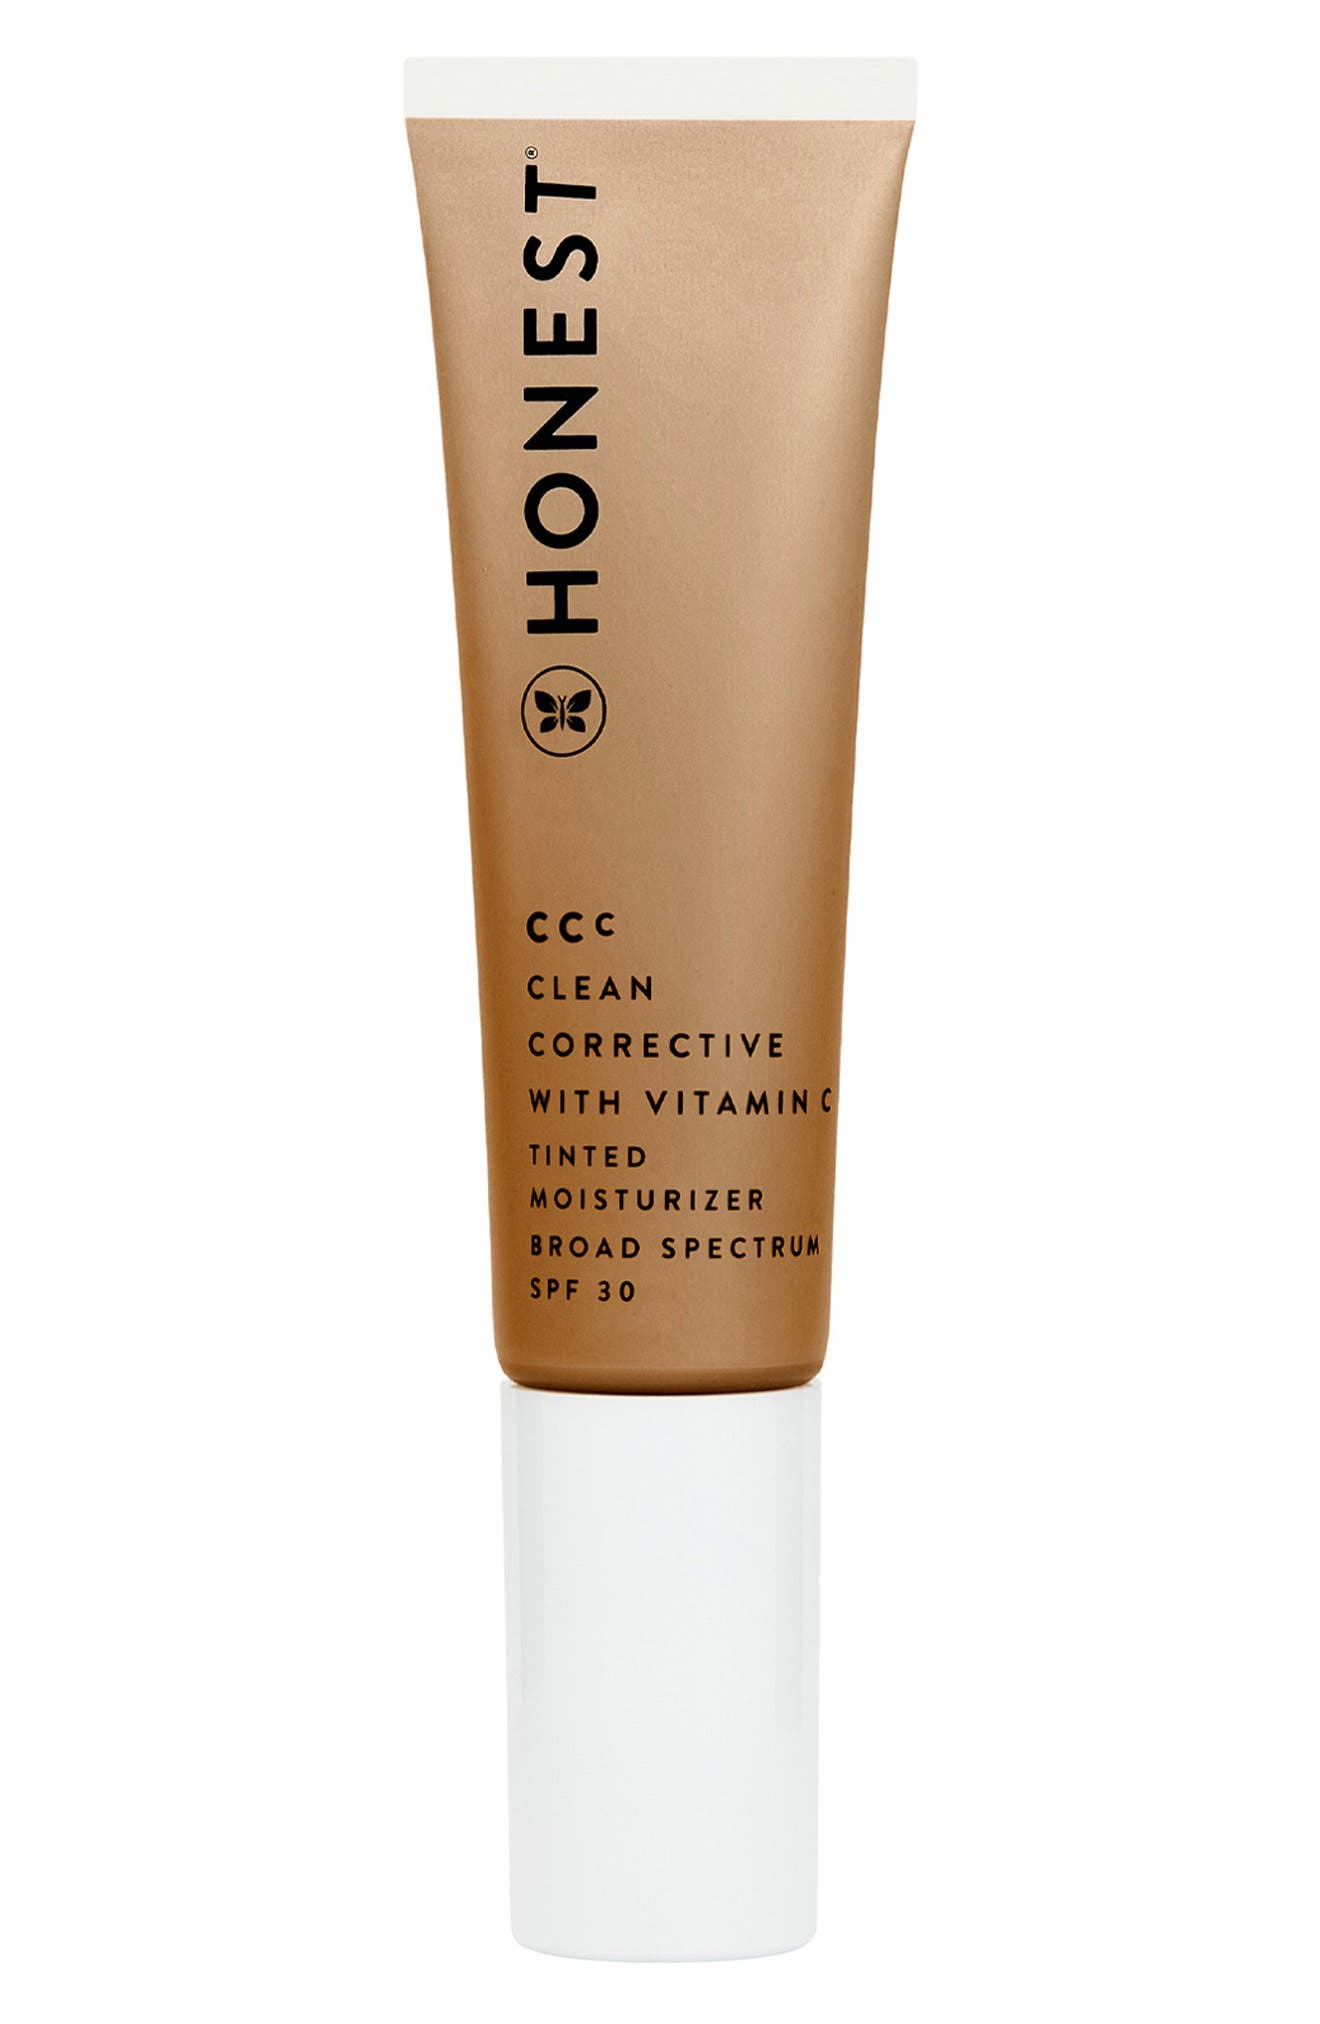 CCC CLEAN CORRECTIVE SPF 30 TINTED MOISTURIZER